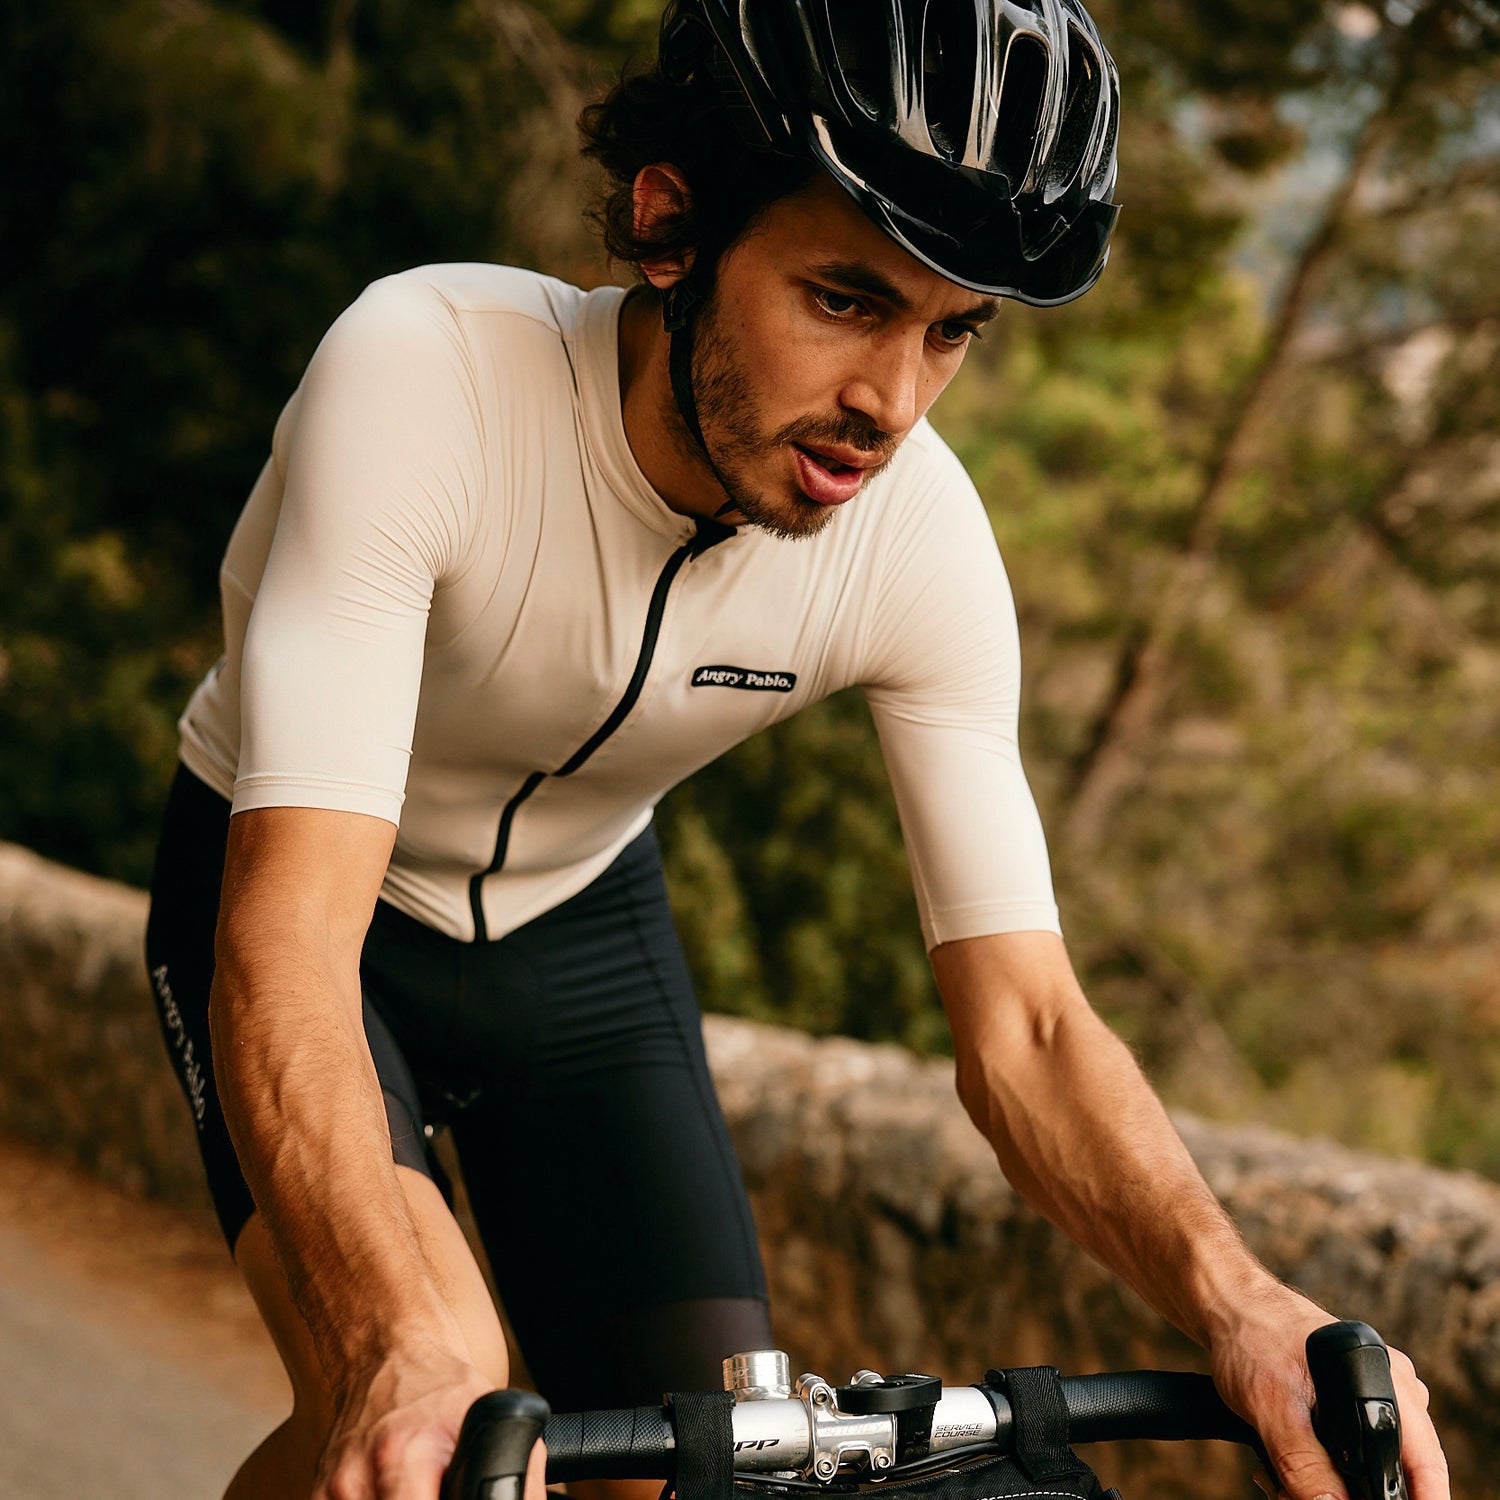 A cyclist riding in Angry Pablo clothing